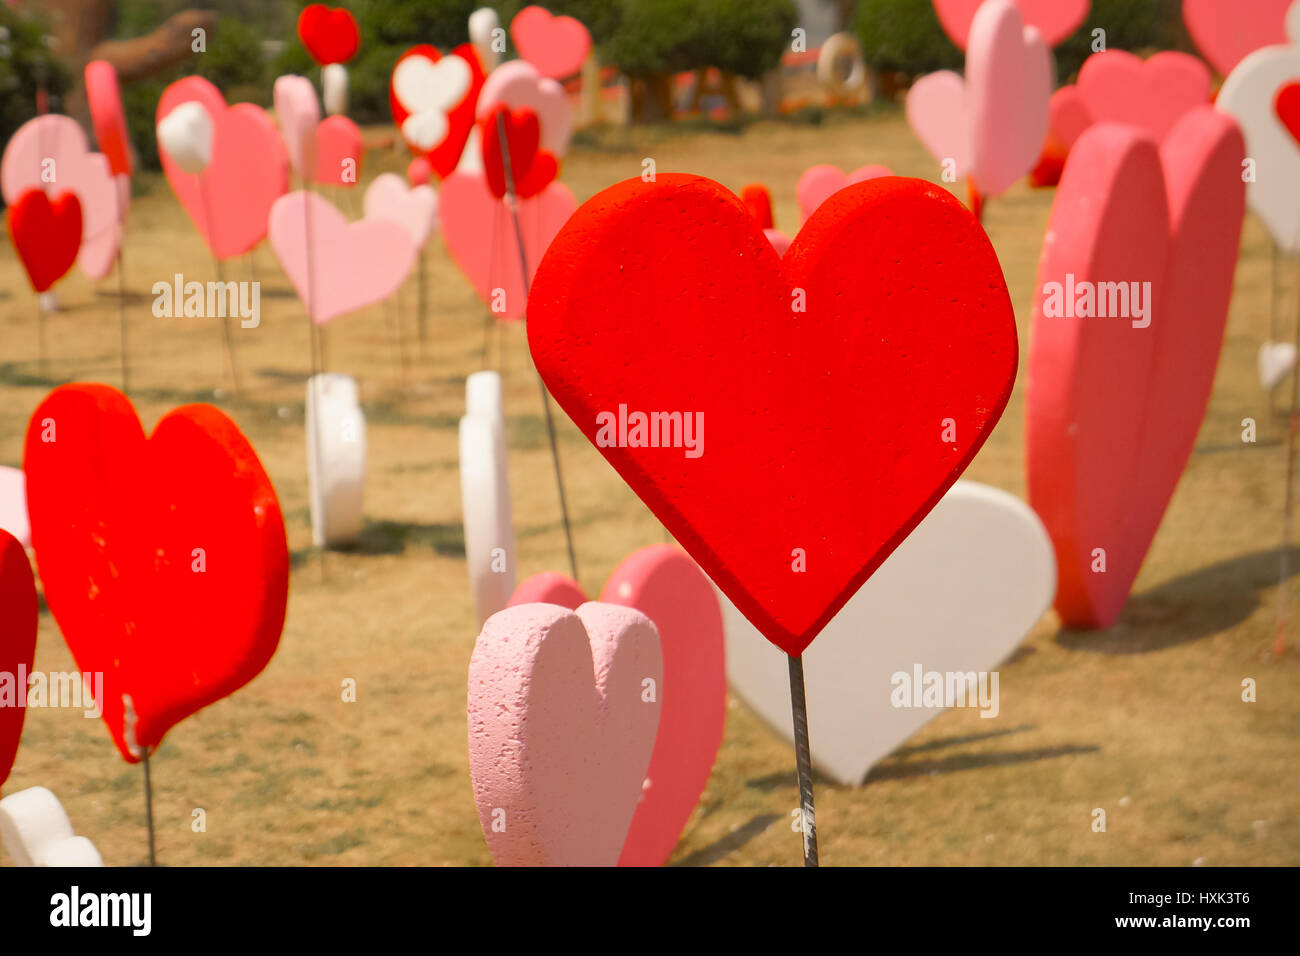 Valentine's Day Wallpapers. Love Romantic Theme : Many Red shape in garden  Stock Photo - Alamy